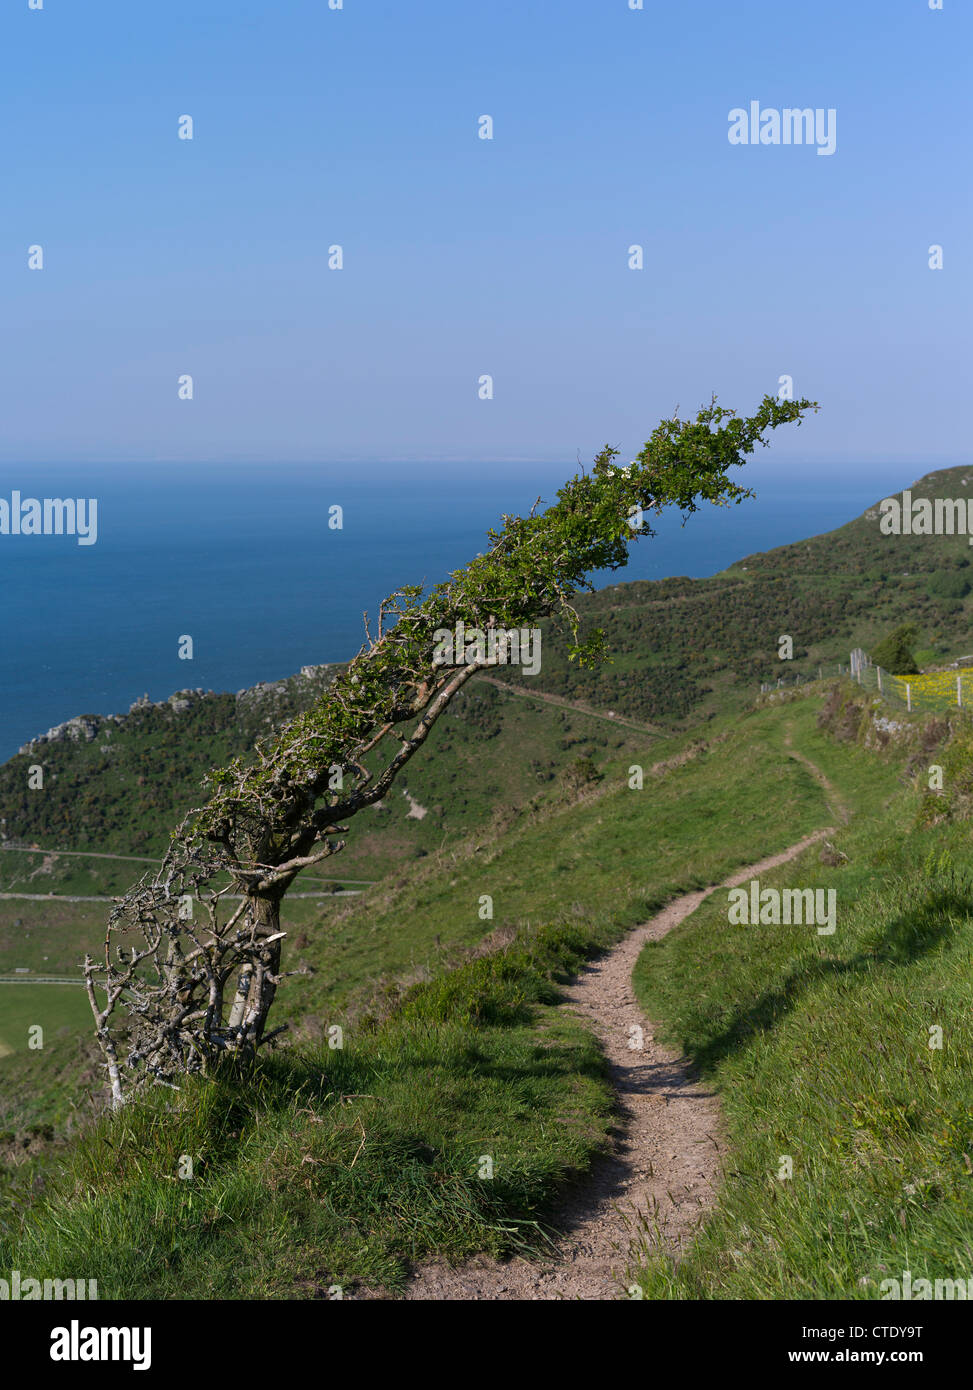 dh The Valley of Rocks LYNTON DEVONSHIRE DEVON ANGLETERRE Royaume-Uni Sentier anglais chemin vent sentier arbre balayé sentier arbres solitaires exmoor atmosphérique parc national Banque D'Images